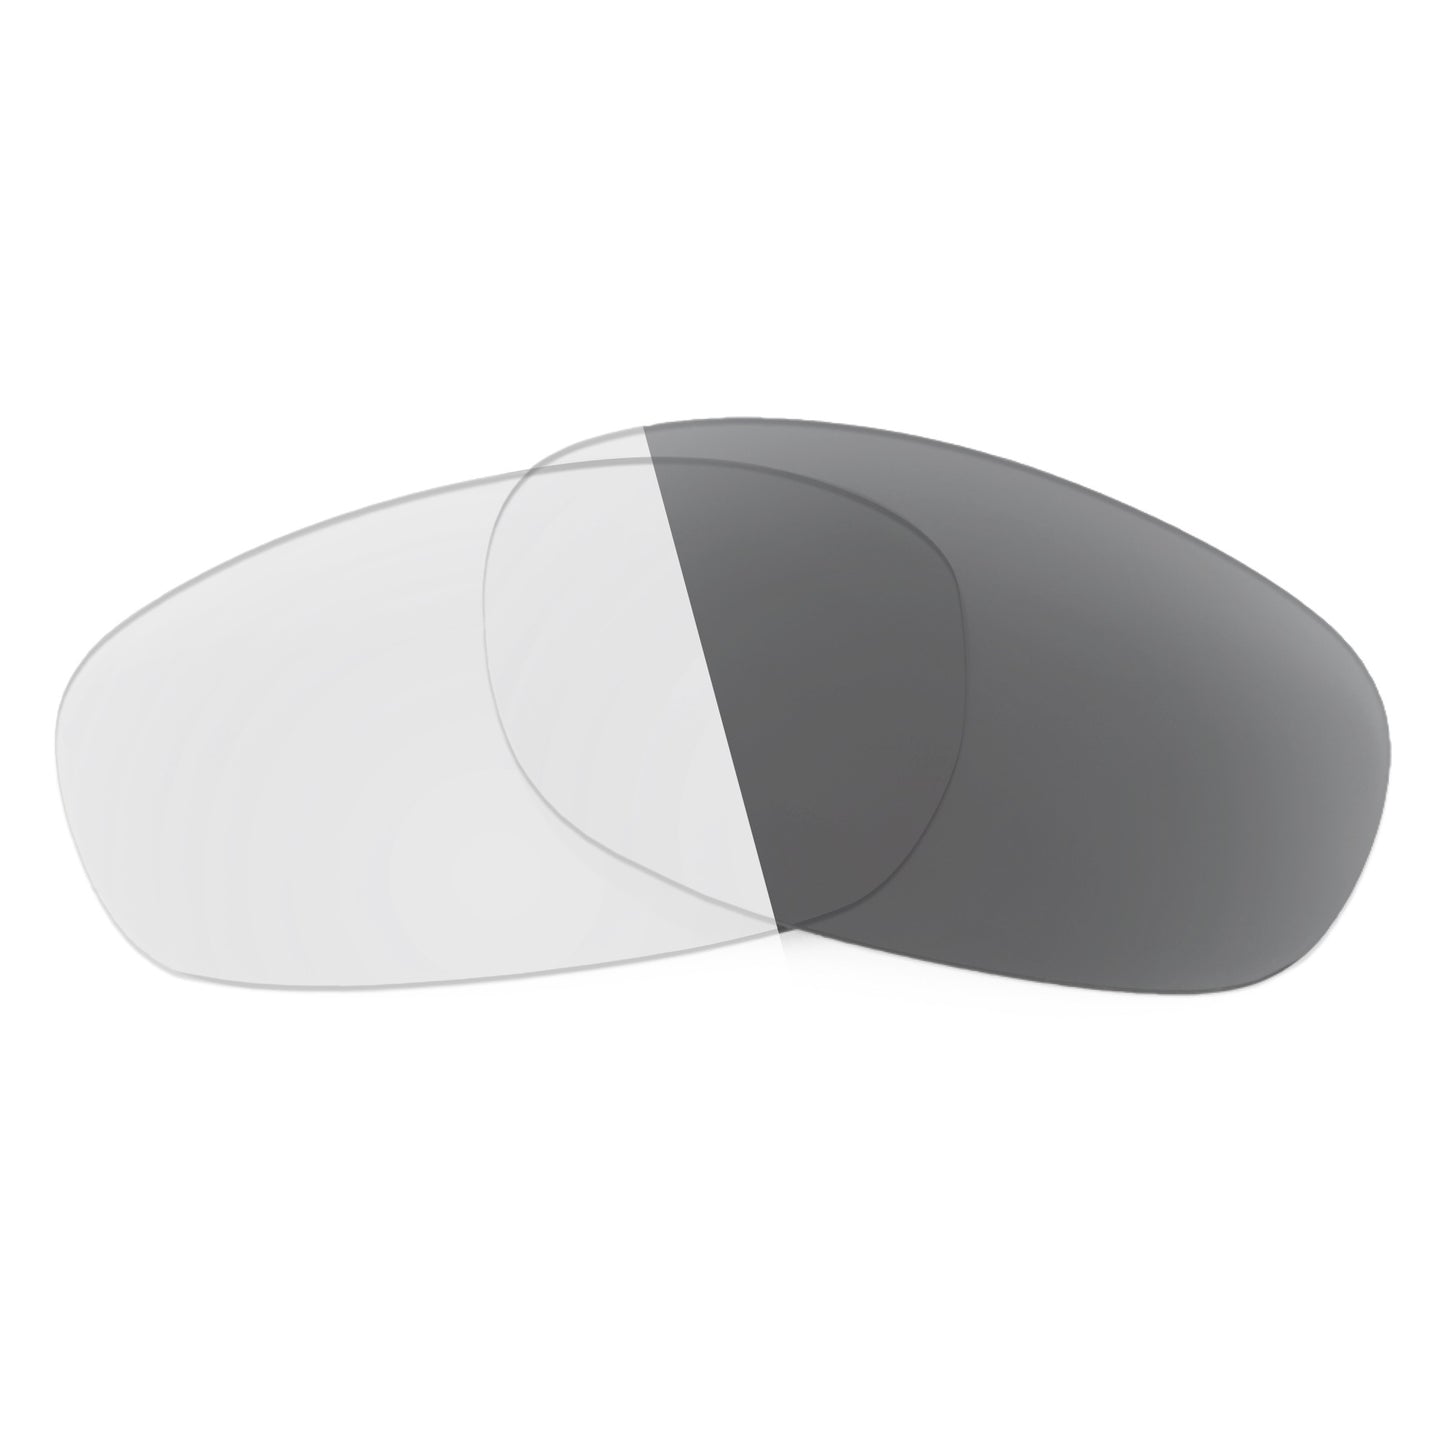 Revant replacement lenses for Ray-Ban RB4188 63mm Non-Polarized Adapt Gray Photochromic